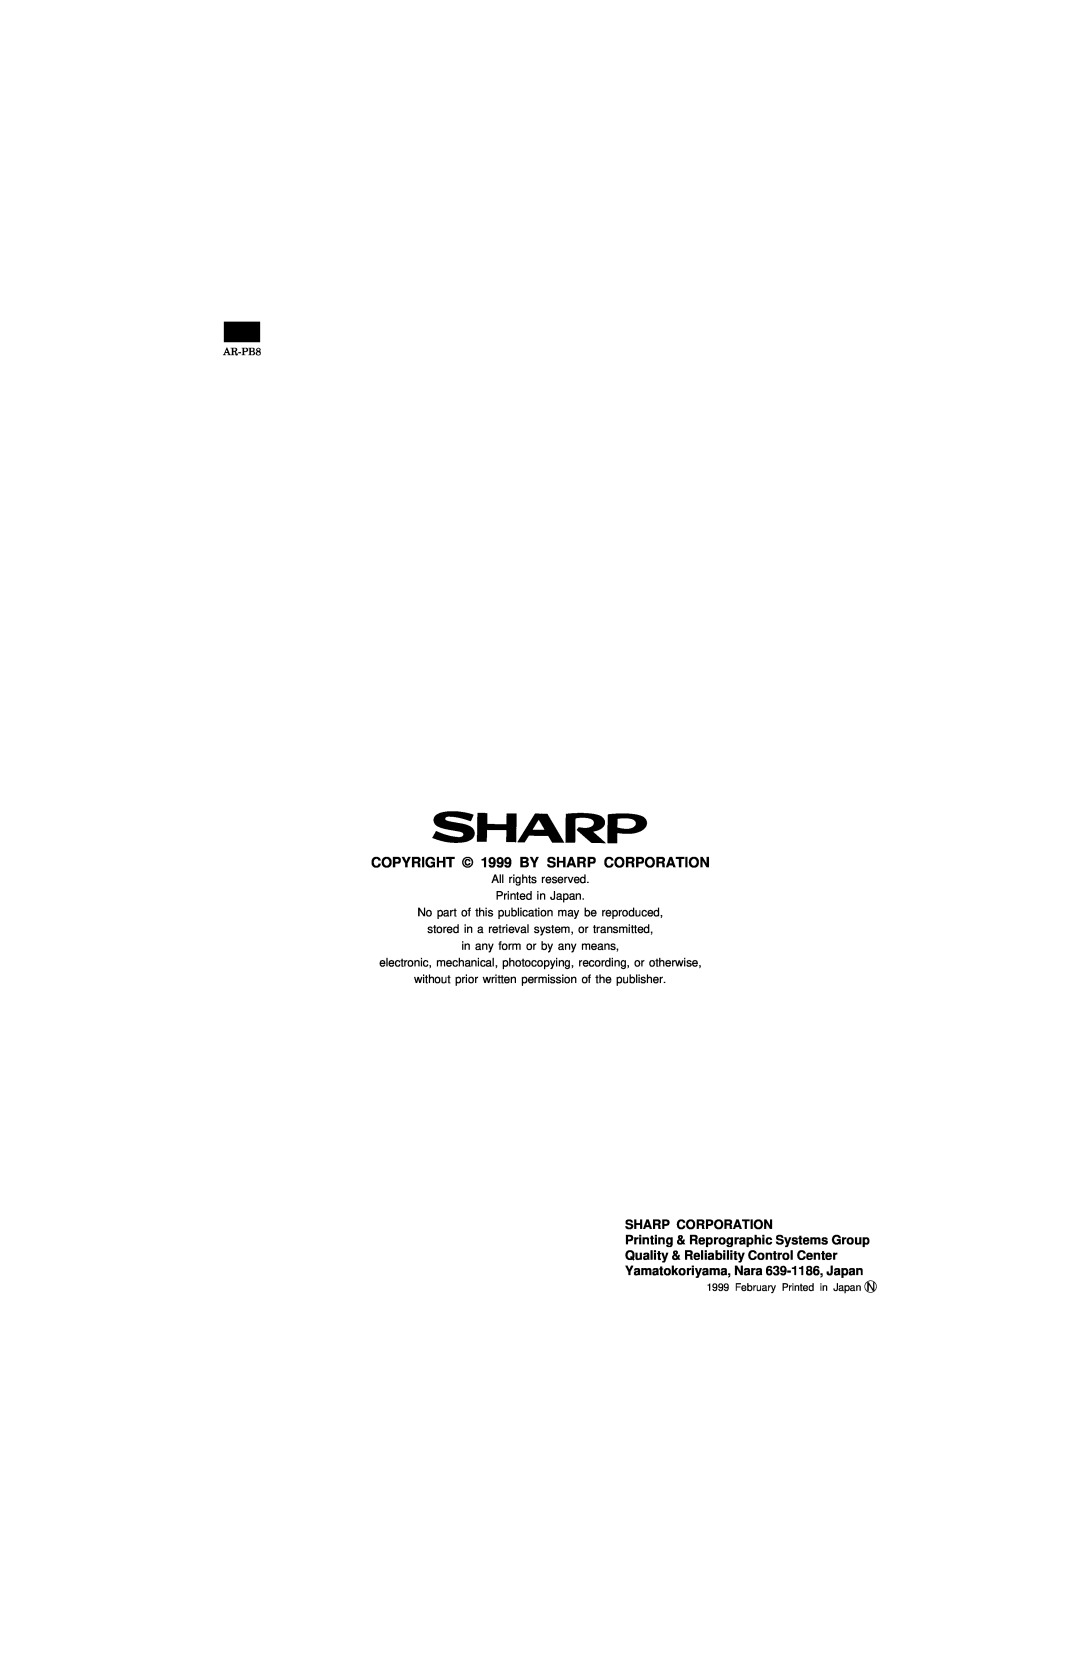 Sharp AR-PB8 specifications COPYRIGHT 1999 BY SHARP CORPORATION, Sharp Corporation, Printing & Reprographic Systems Group 